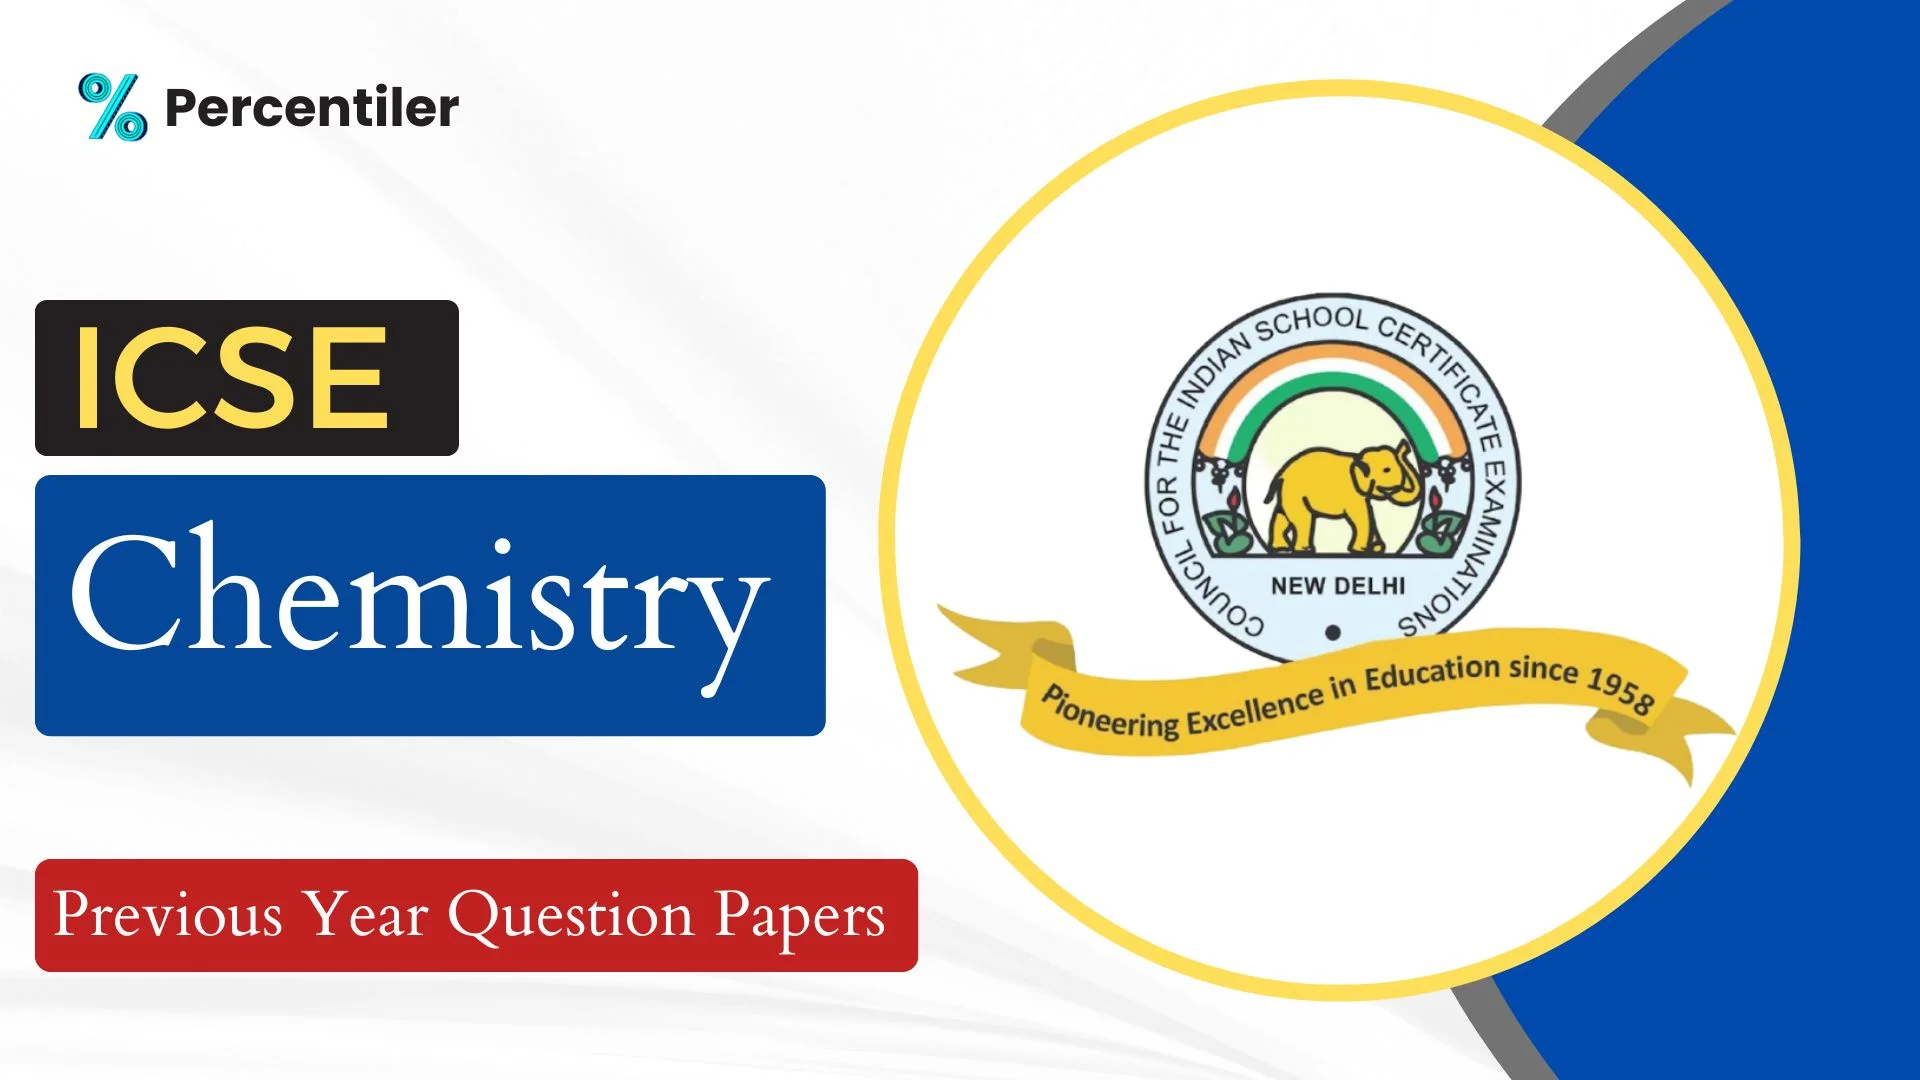 ICSE Chemistry Previous Year Question Papers